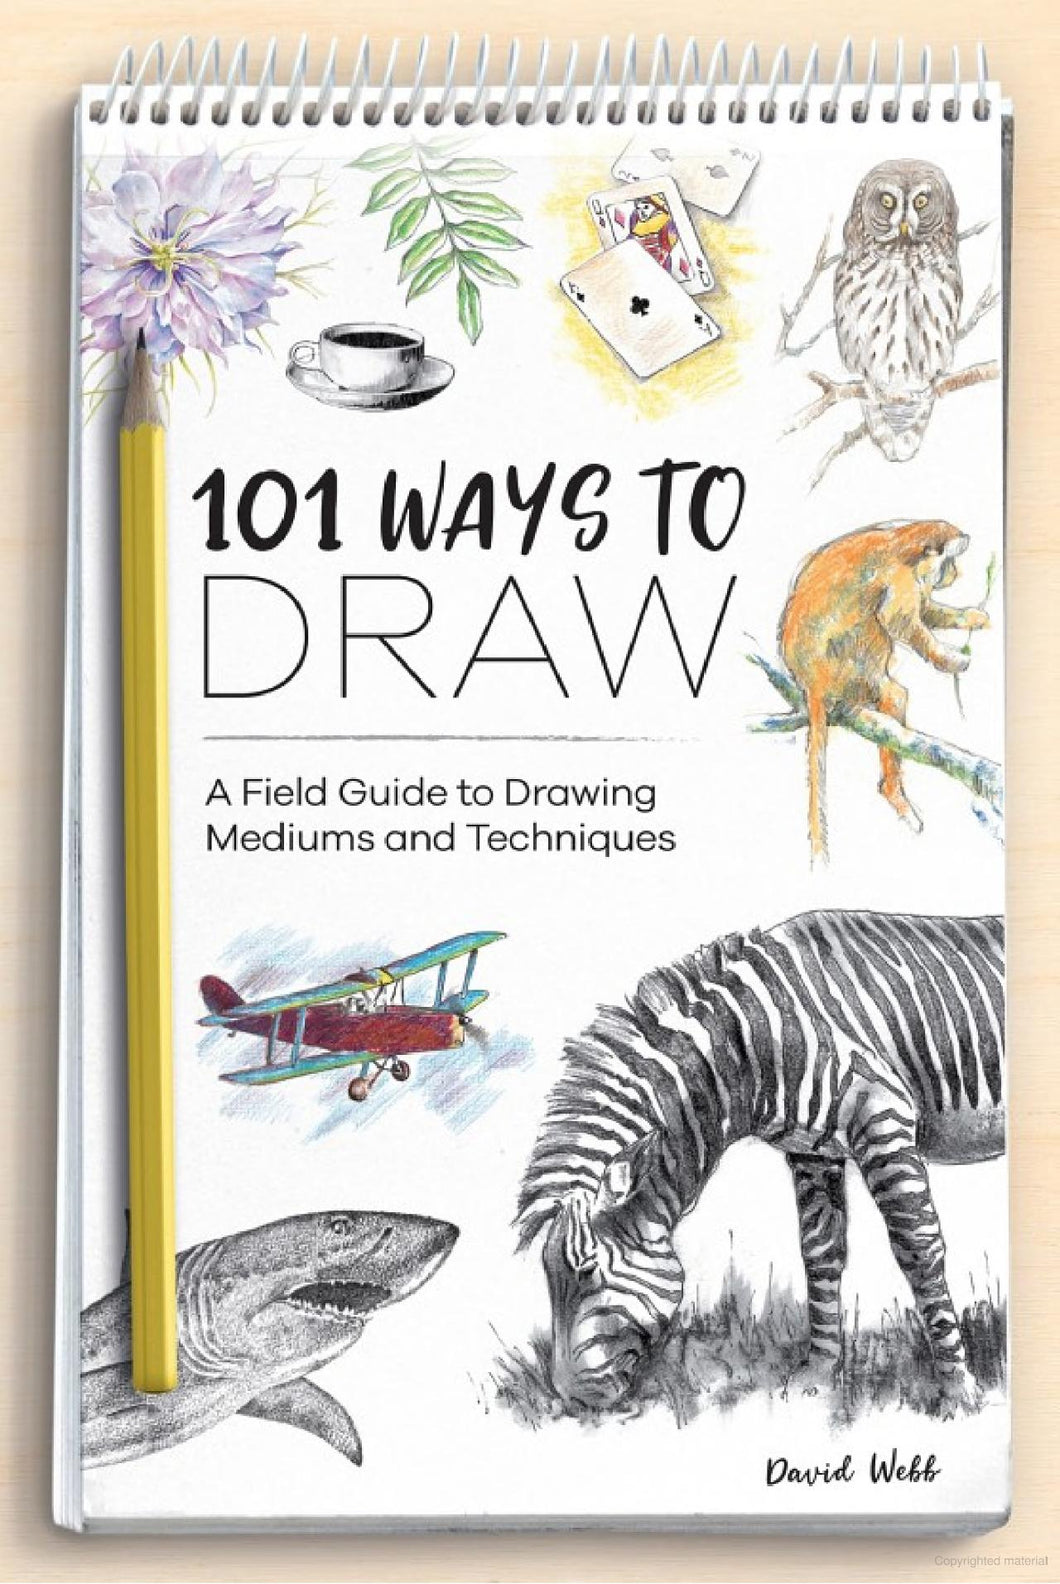 101 Ways To Draw: A Field Guide to Drawing Mediums and Techniques